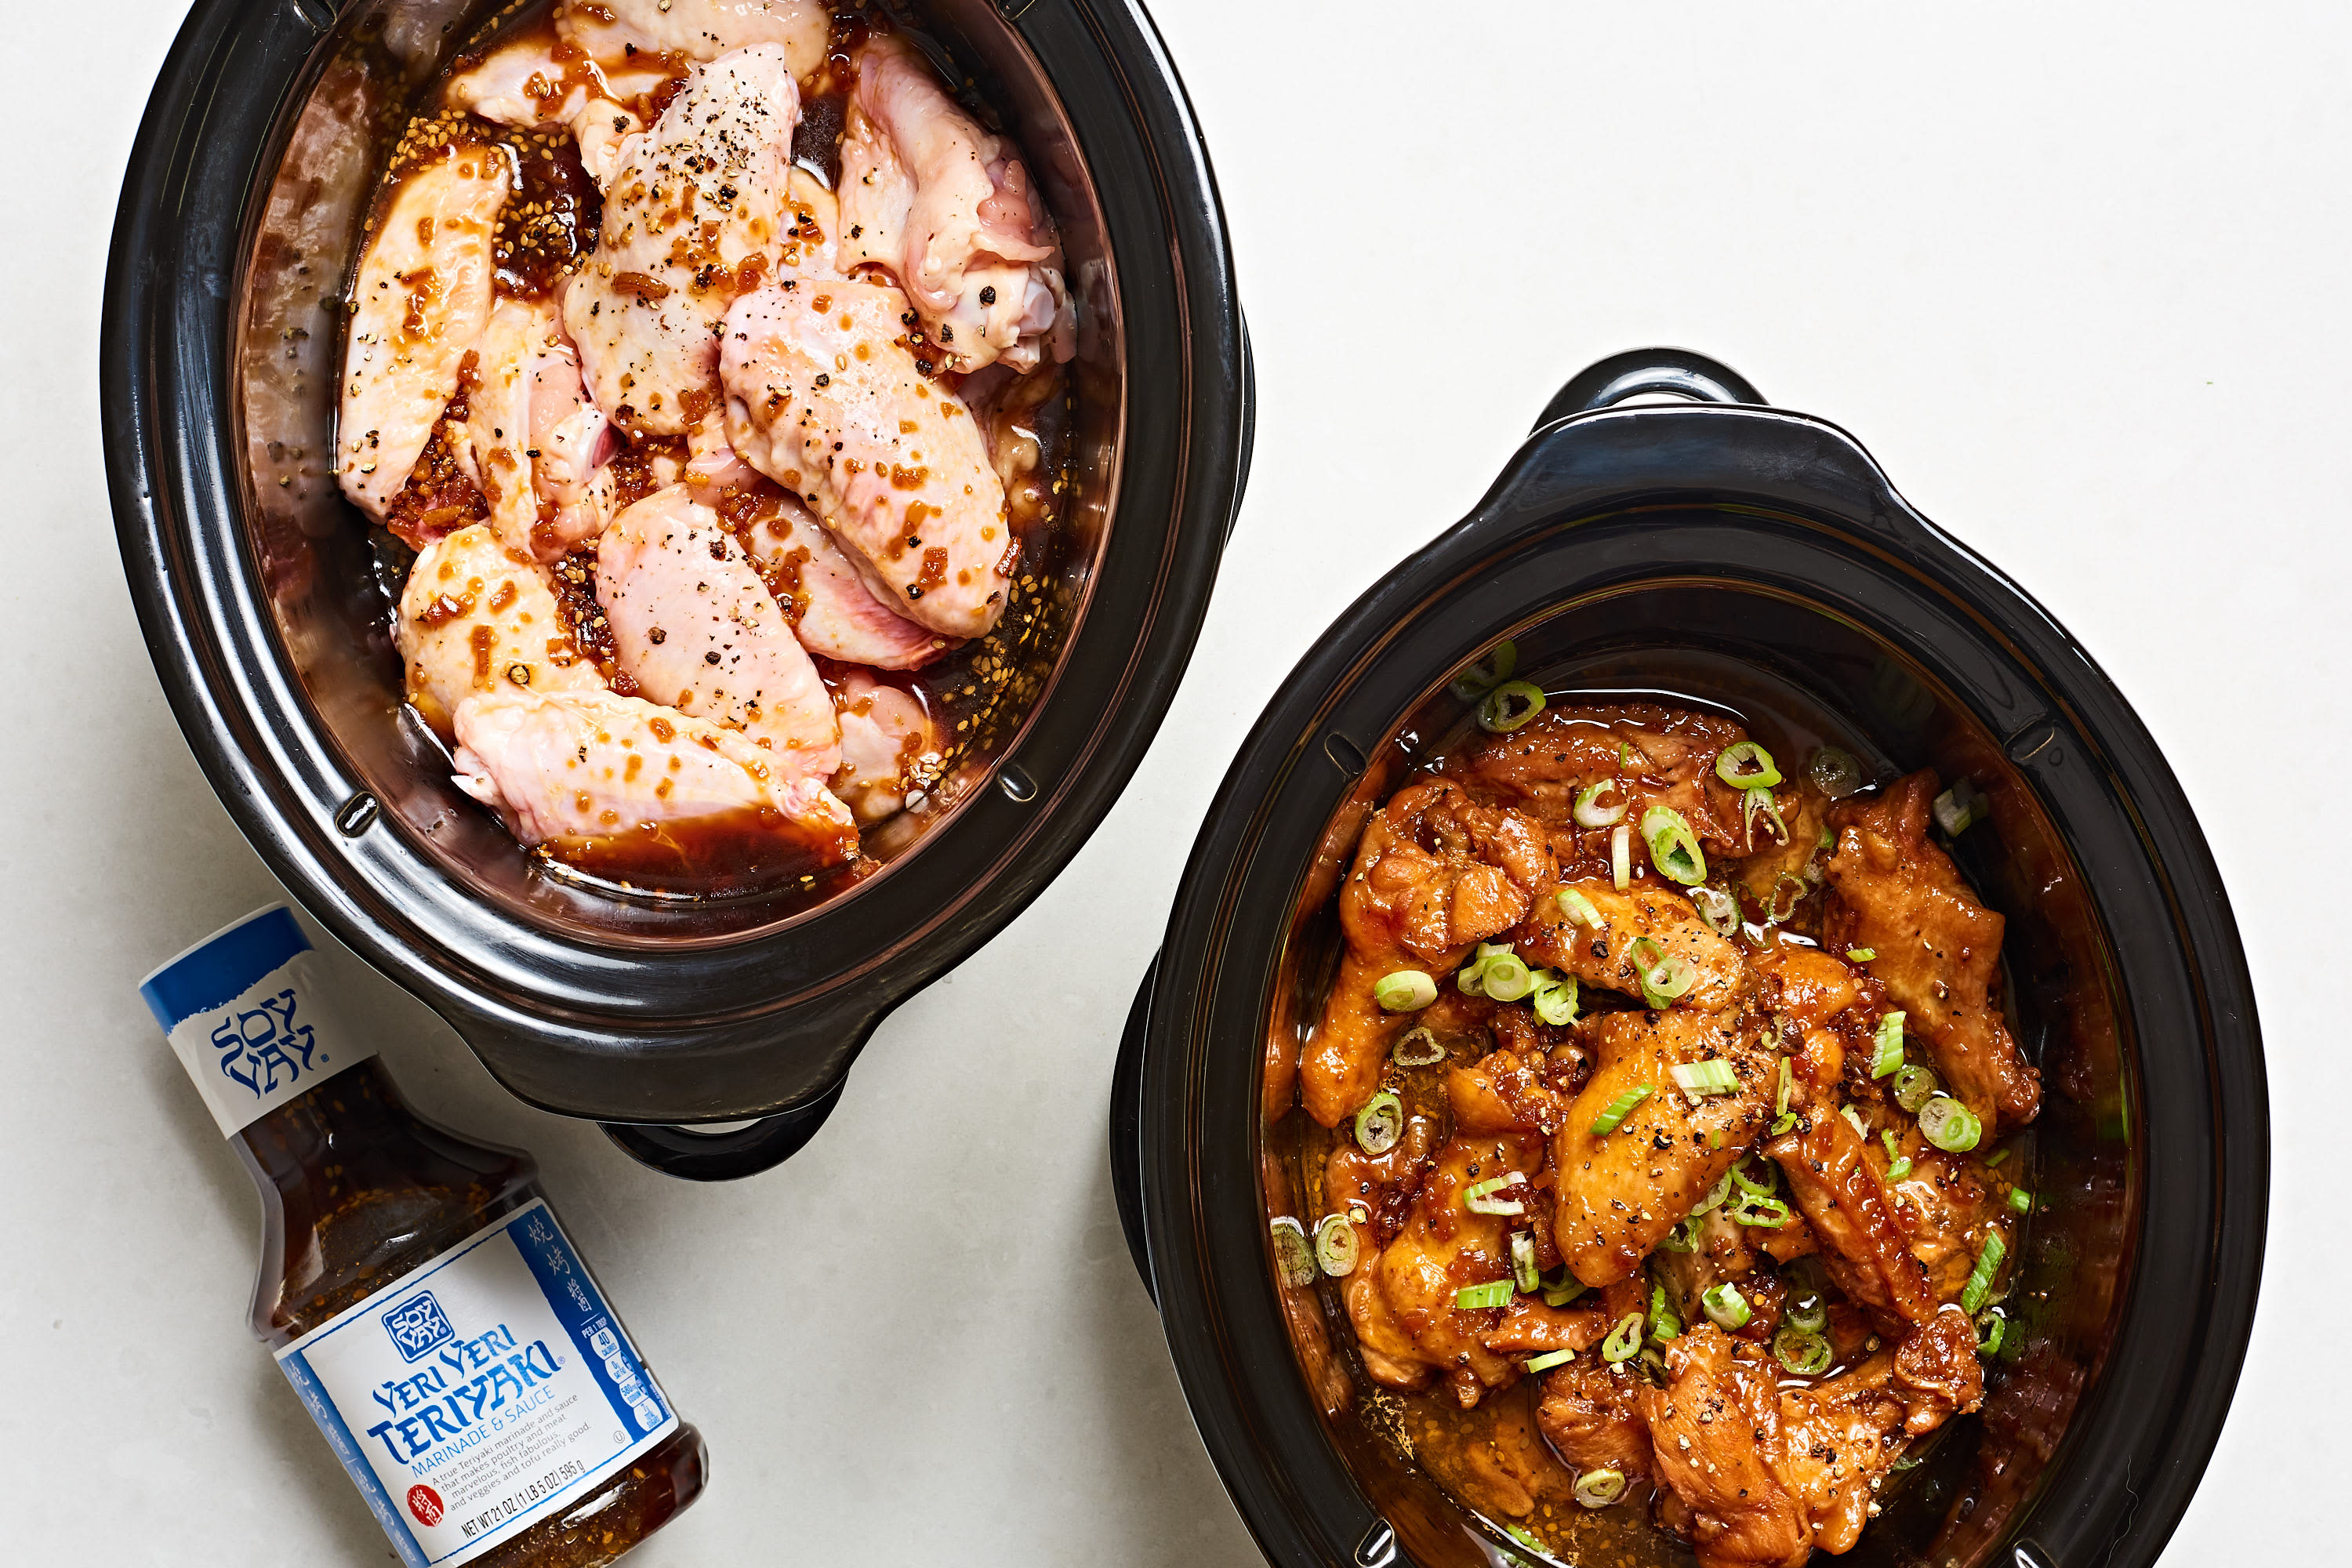 Crockpot Double Dipper.mp4, slow cooker, Why have one dip when you can  have TWO!? Spice it up with two classic dips featuring our Crockpot Double  Dipper Slow Cooker.